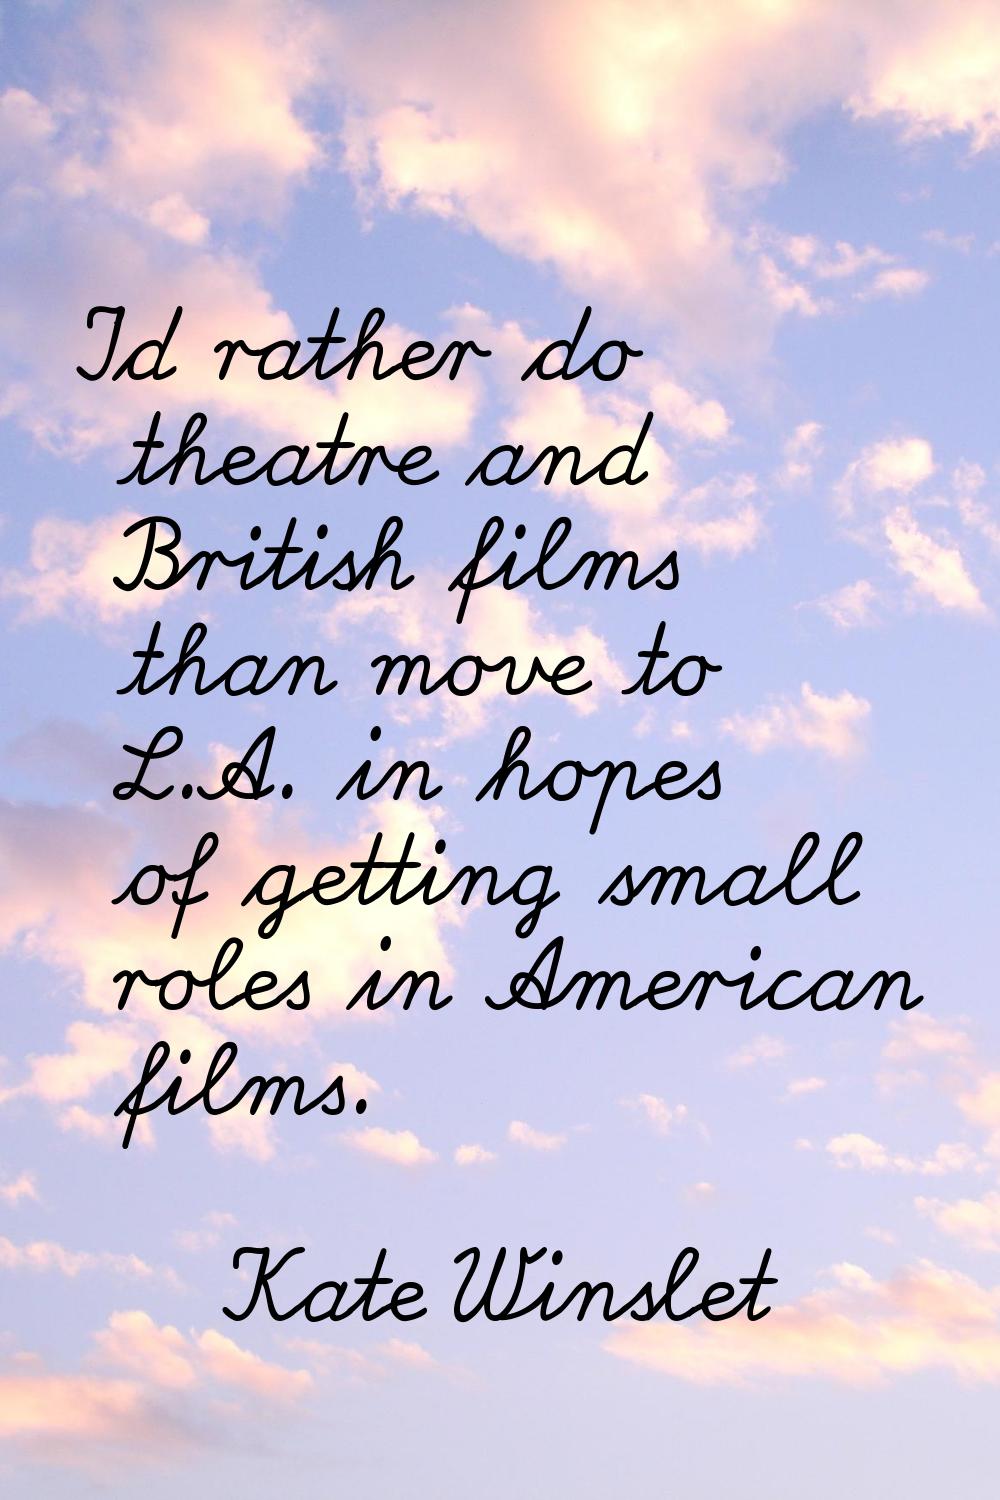 I'd rather do theatre and British films than move to L.A. in hopes of getting small roles in Americ